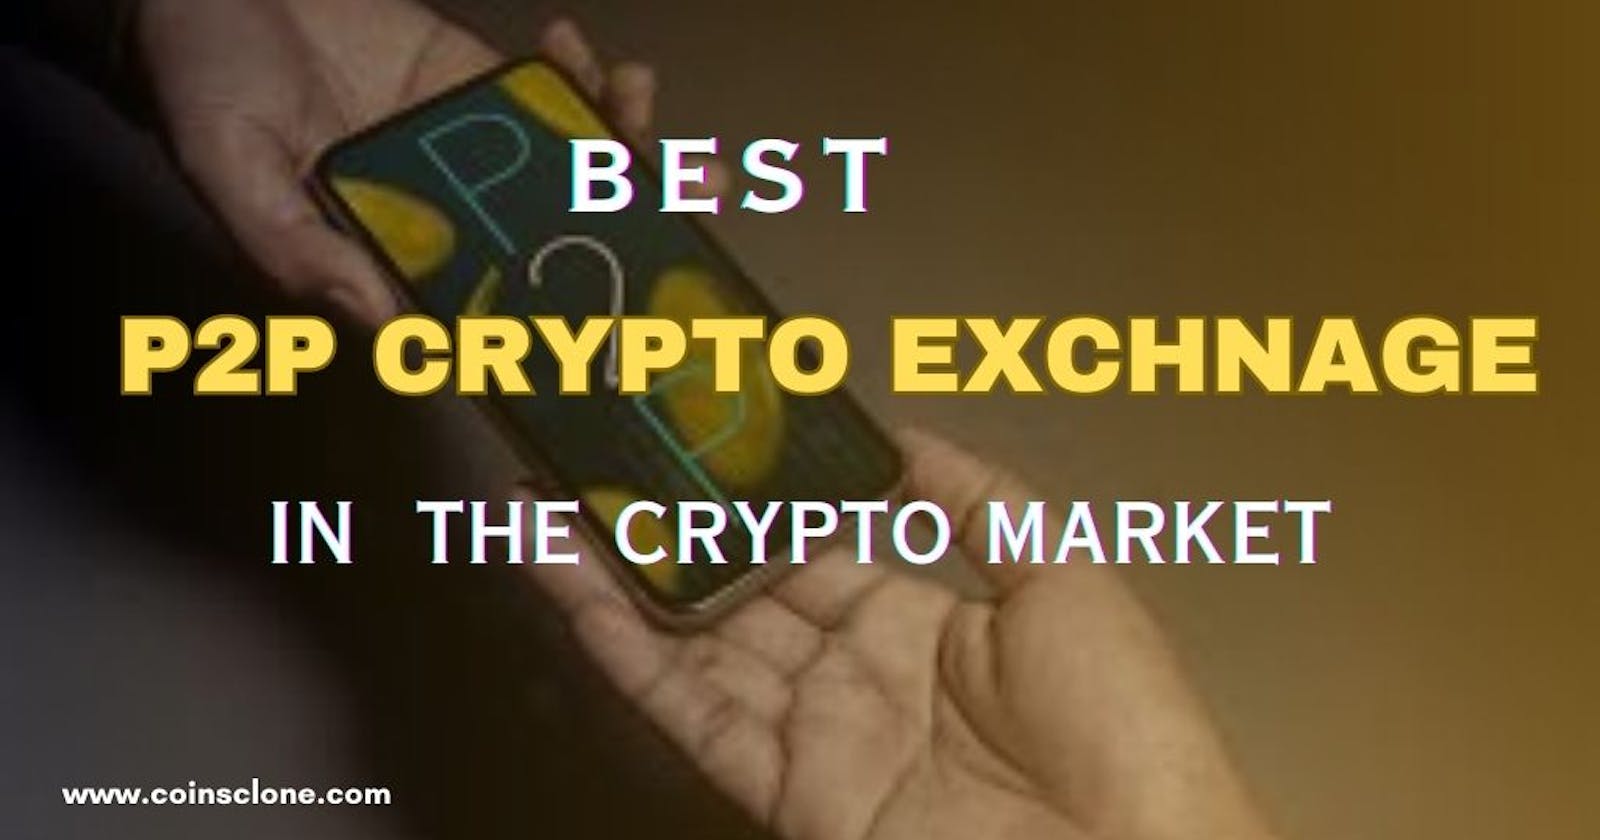 The Best P2P Crypto Exchanges: Your Gateway to Secure Trading